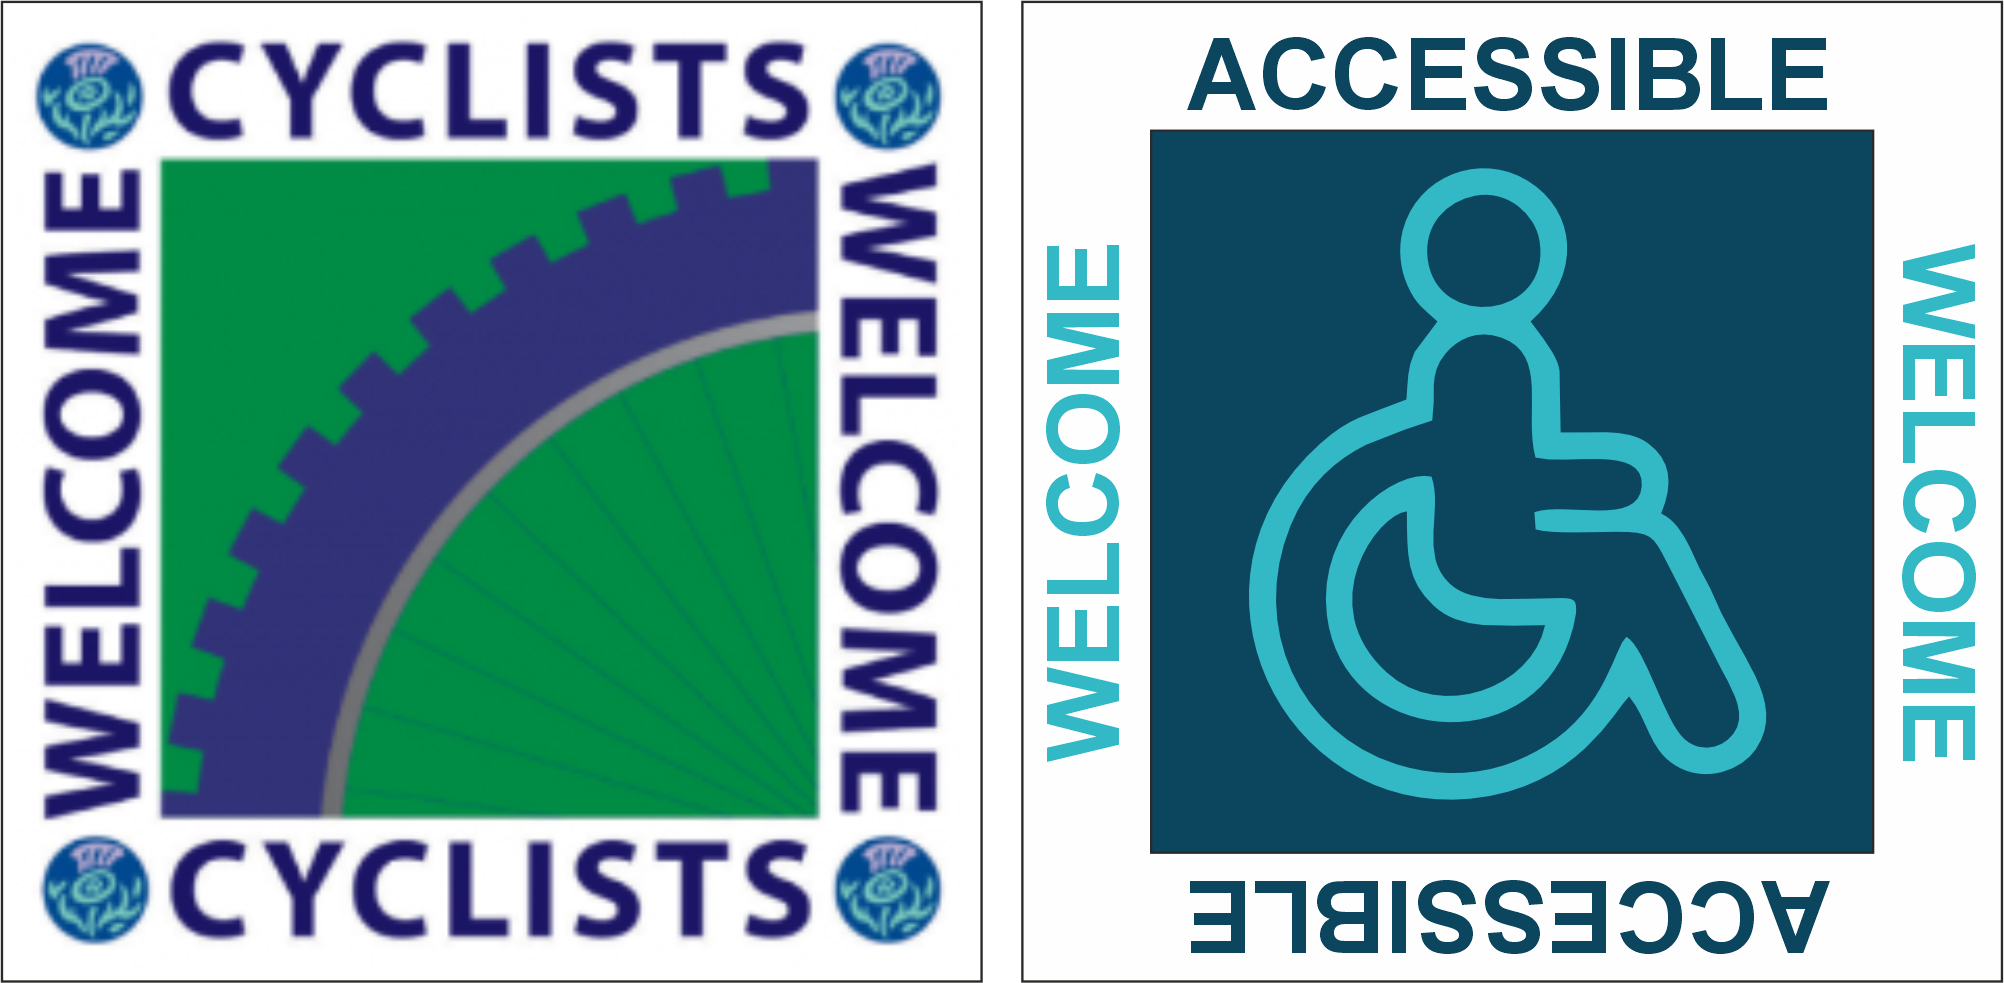 aCCESSIBLITY ICONS